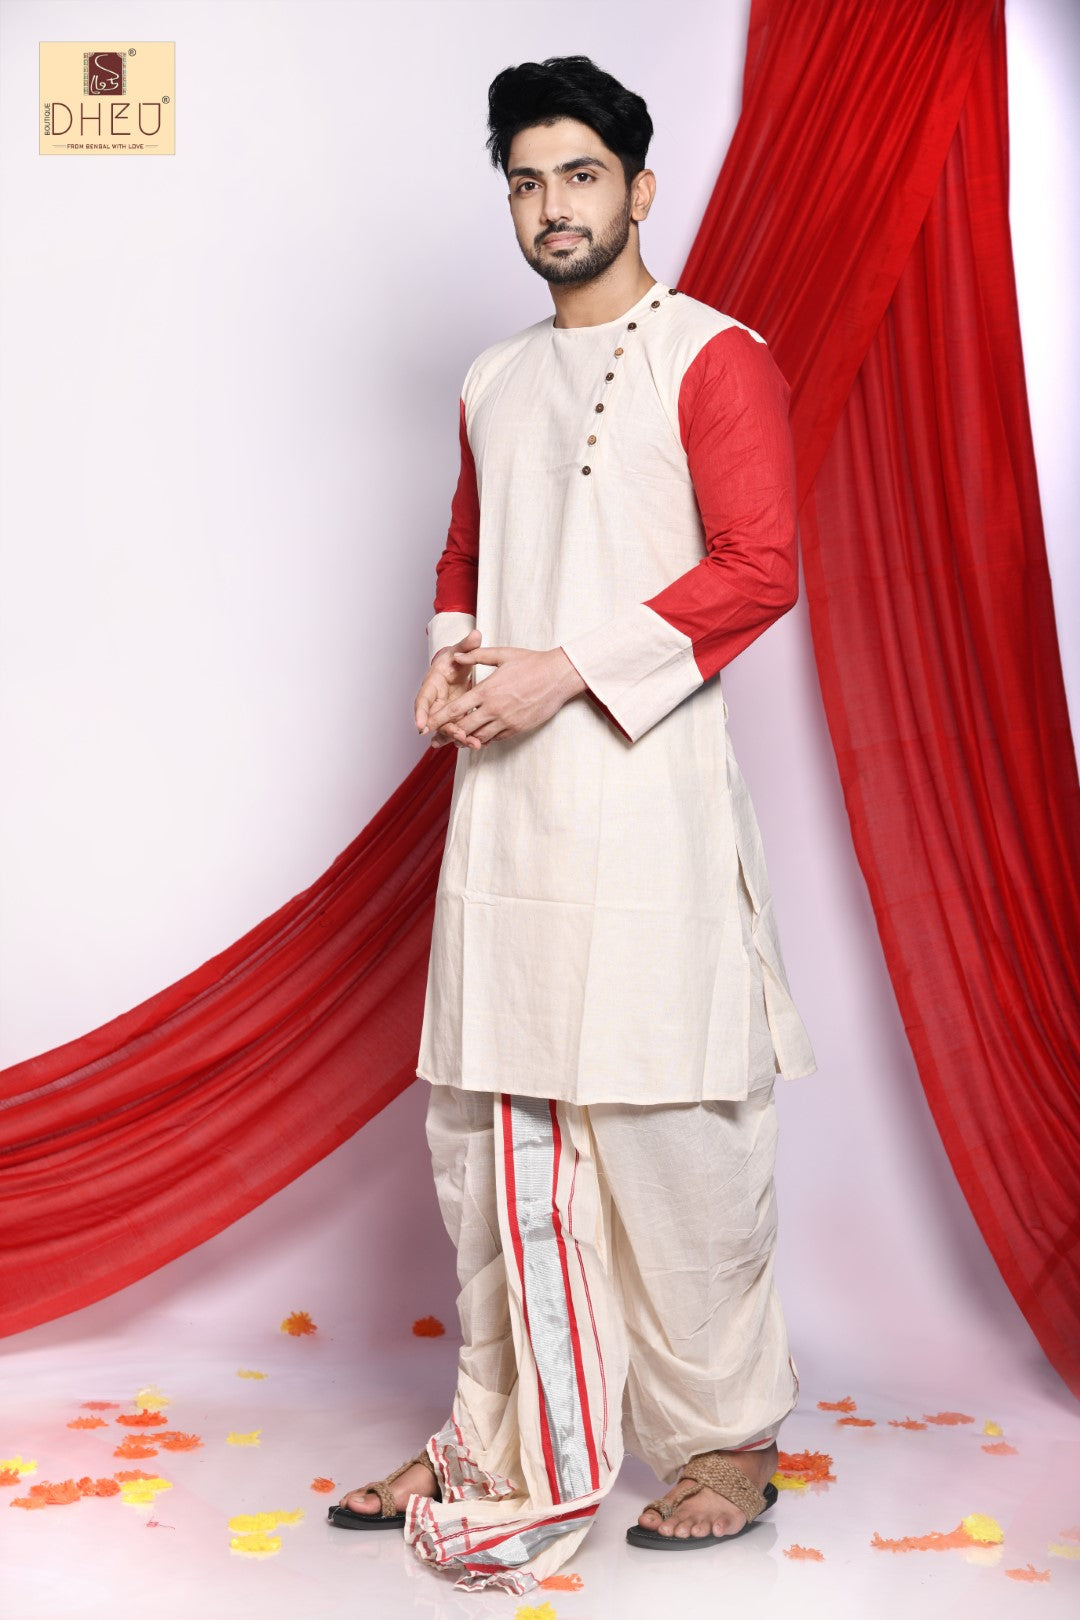 Classic red and white kurta with red & white designer dhoti from dheu.in